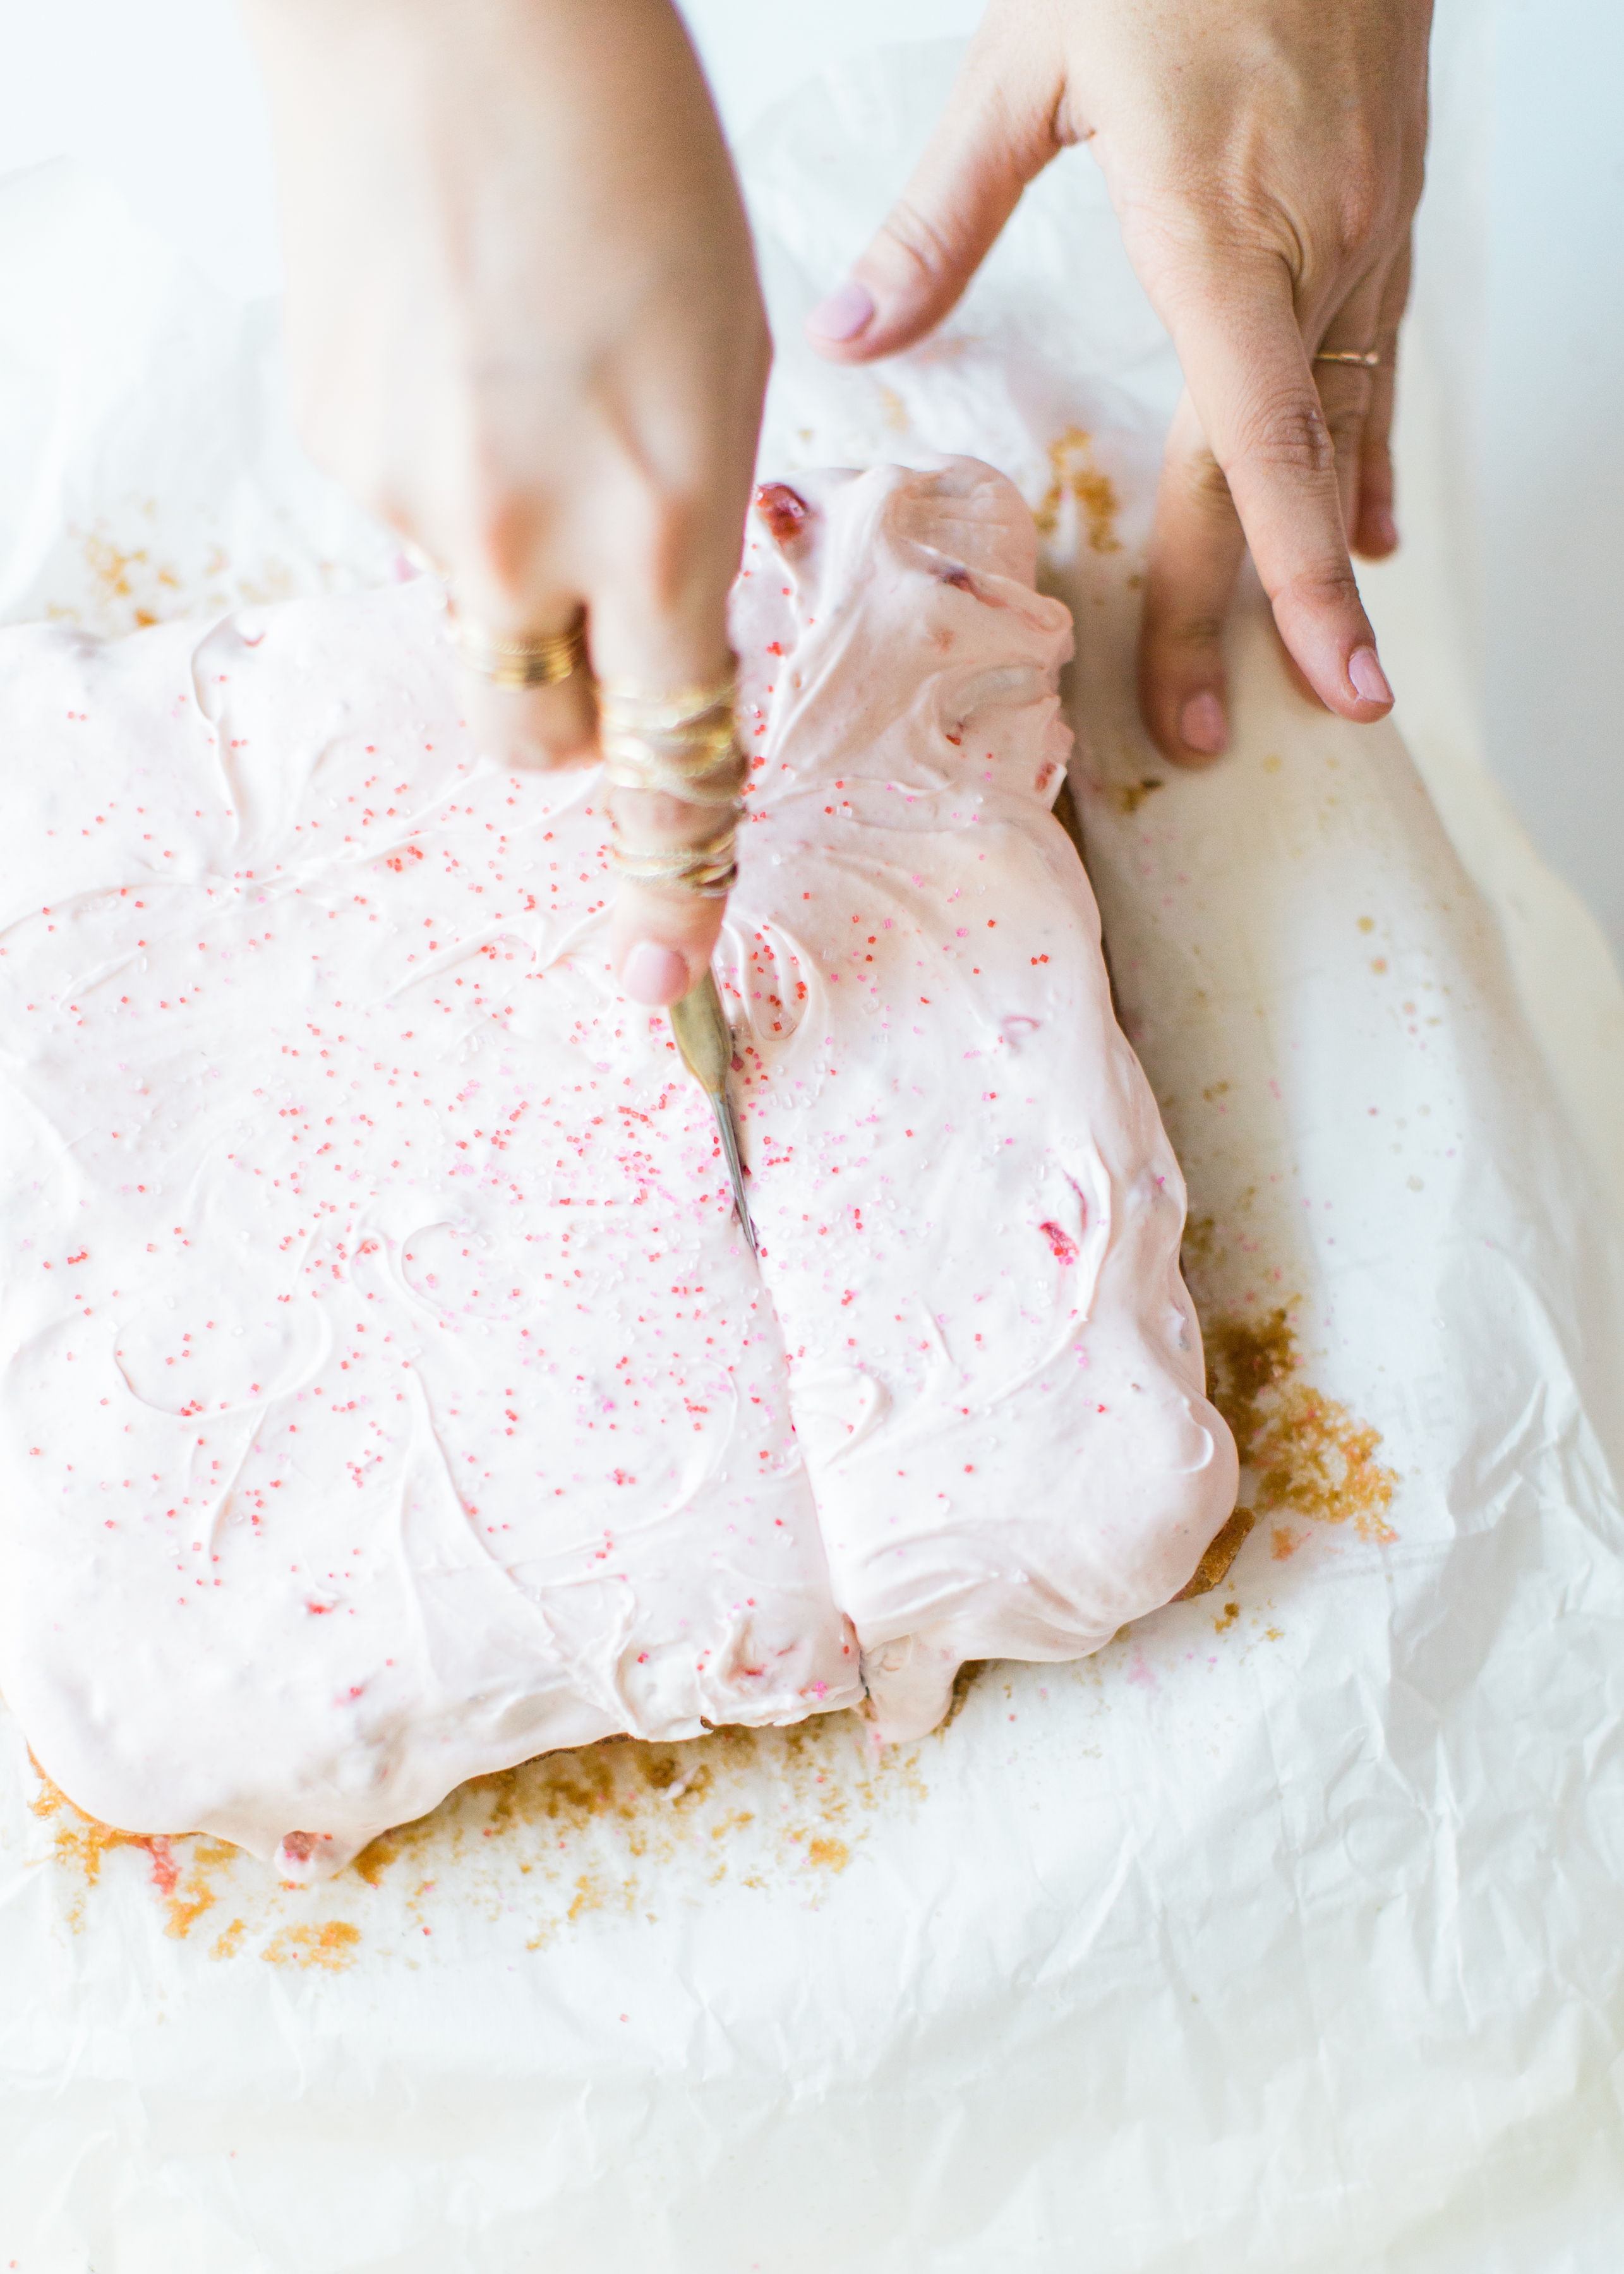 This simple homemade strawberry cake was an instant hit in our house. Easy enough to make with your kids, and bursting with fresh strawberries and topped with a decadent strawberry frosting, you'll be amazed at how moist and delicious this cake is. Click through for the recipe. #strawberrycake #kidsrecipe #easycake #easystrawberrycake #dairyfree #crazycake | glitterinc.com | @glitterinc